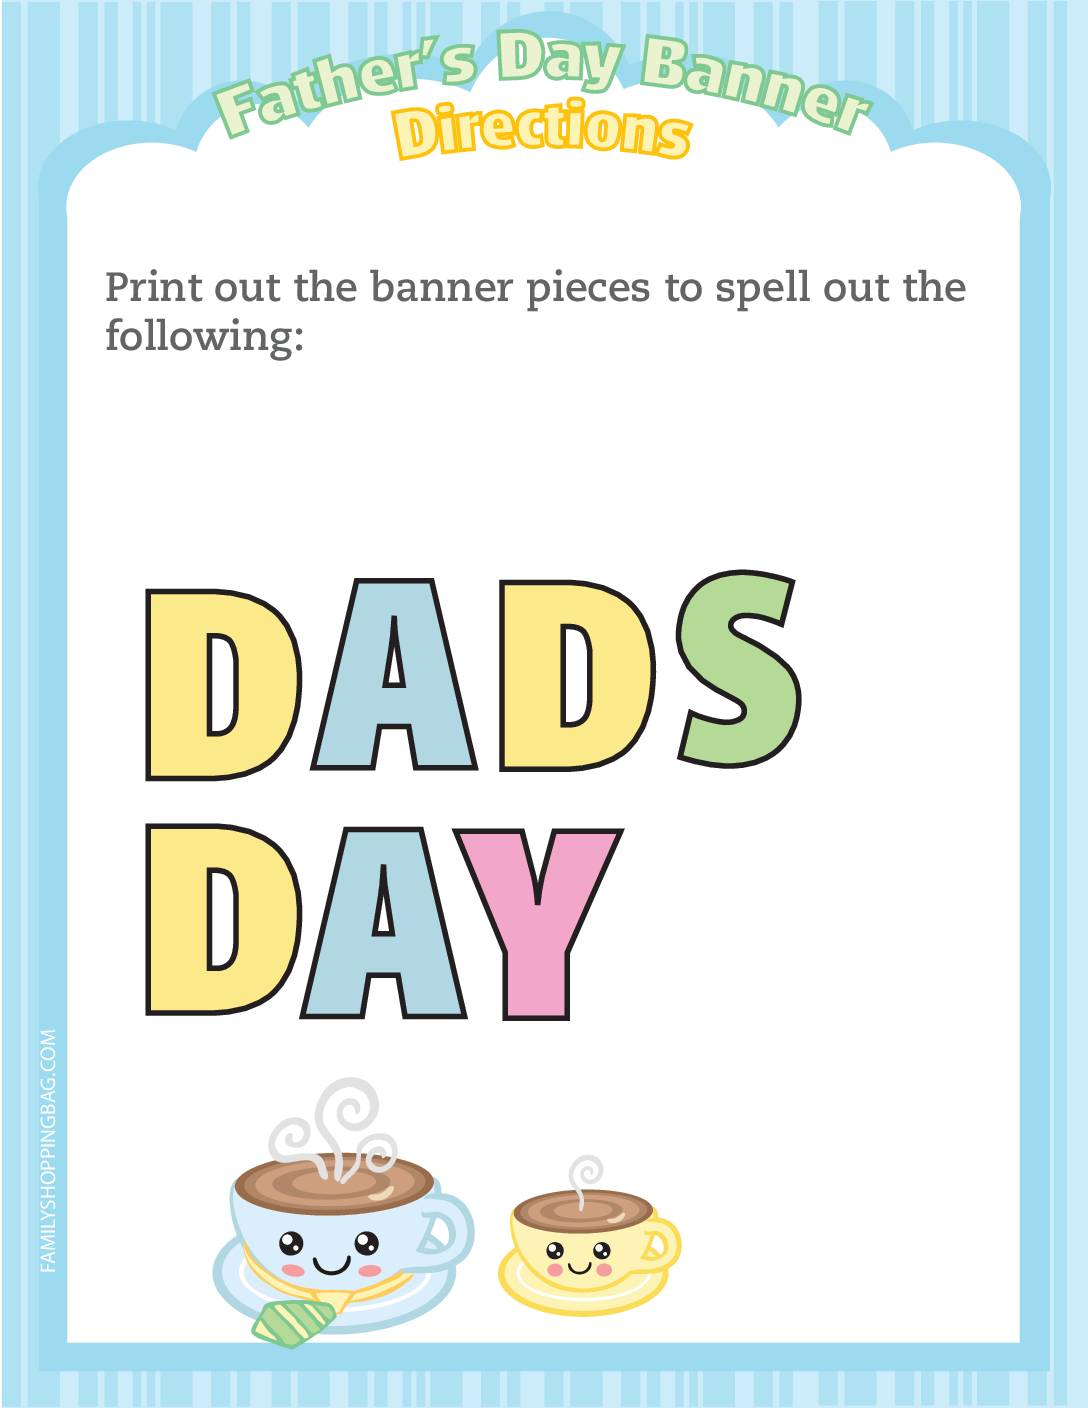 Banner Directions Fathers Day Breakfast  pdf